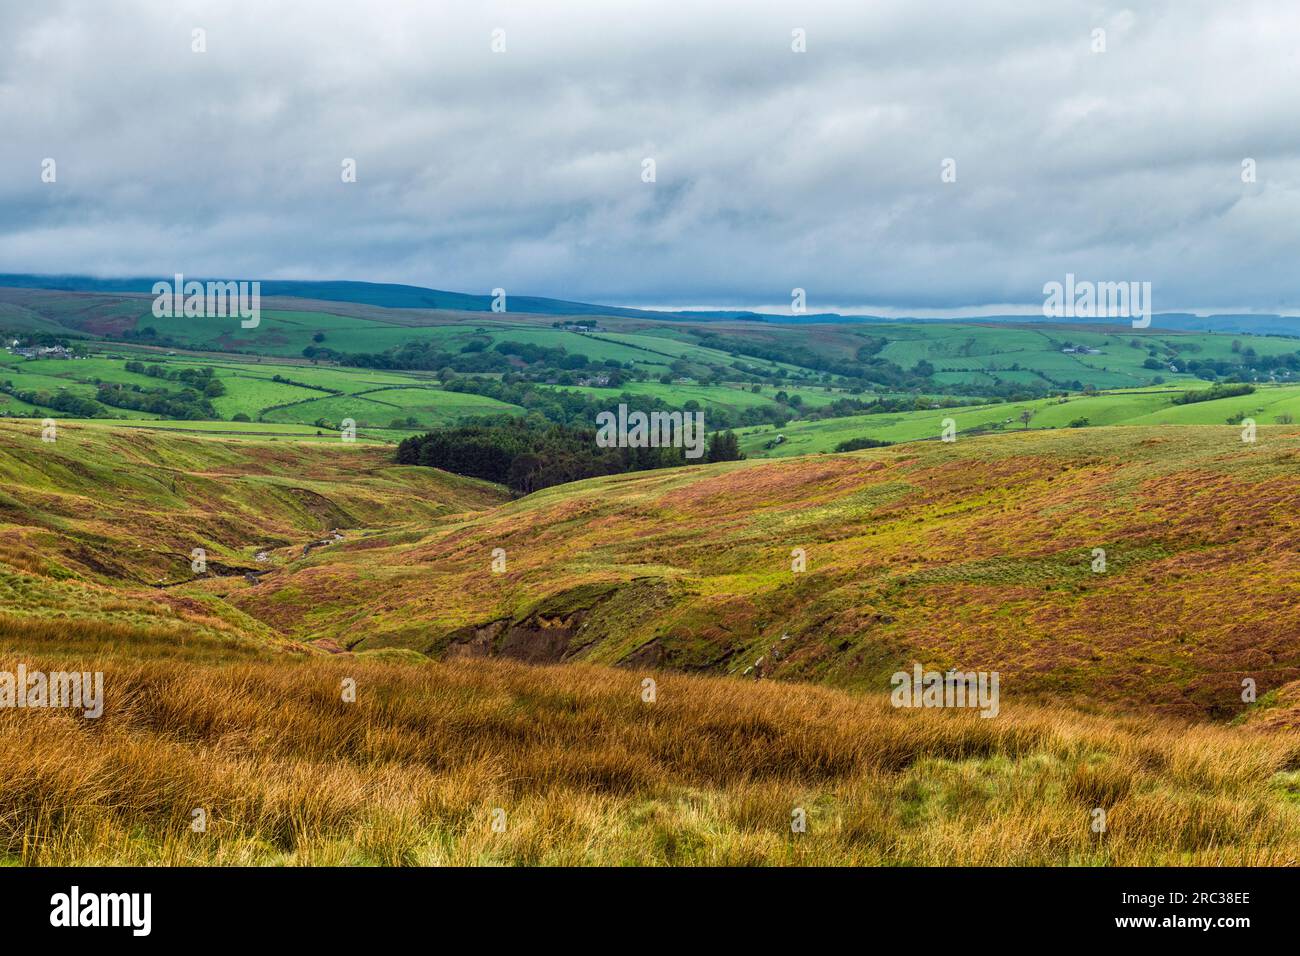 A wide landscape view across part of the Forest of Bowland in Lancashire from wild heath to fields and trees. Lancashire and Yorkshire share Bowland Stock Photo